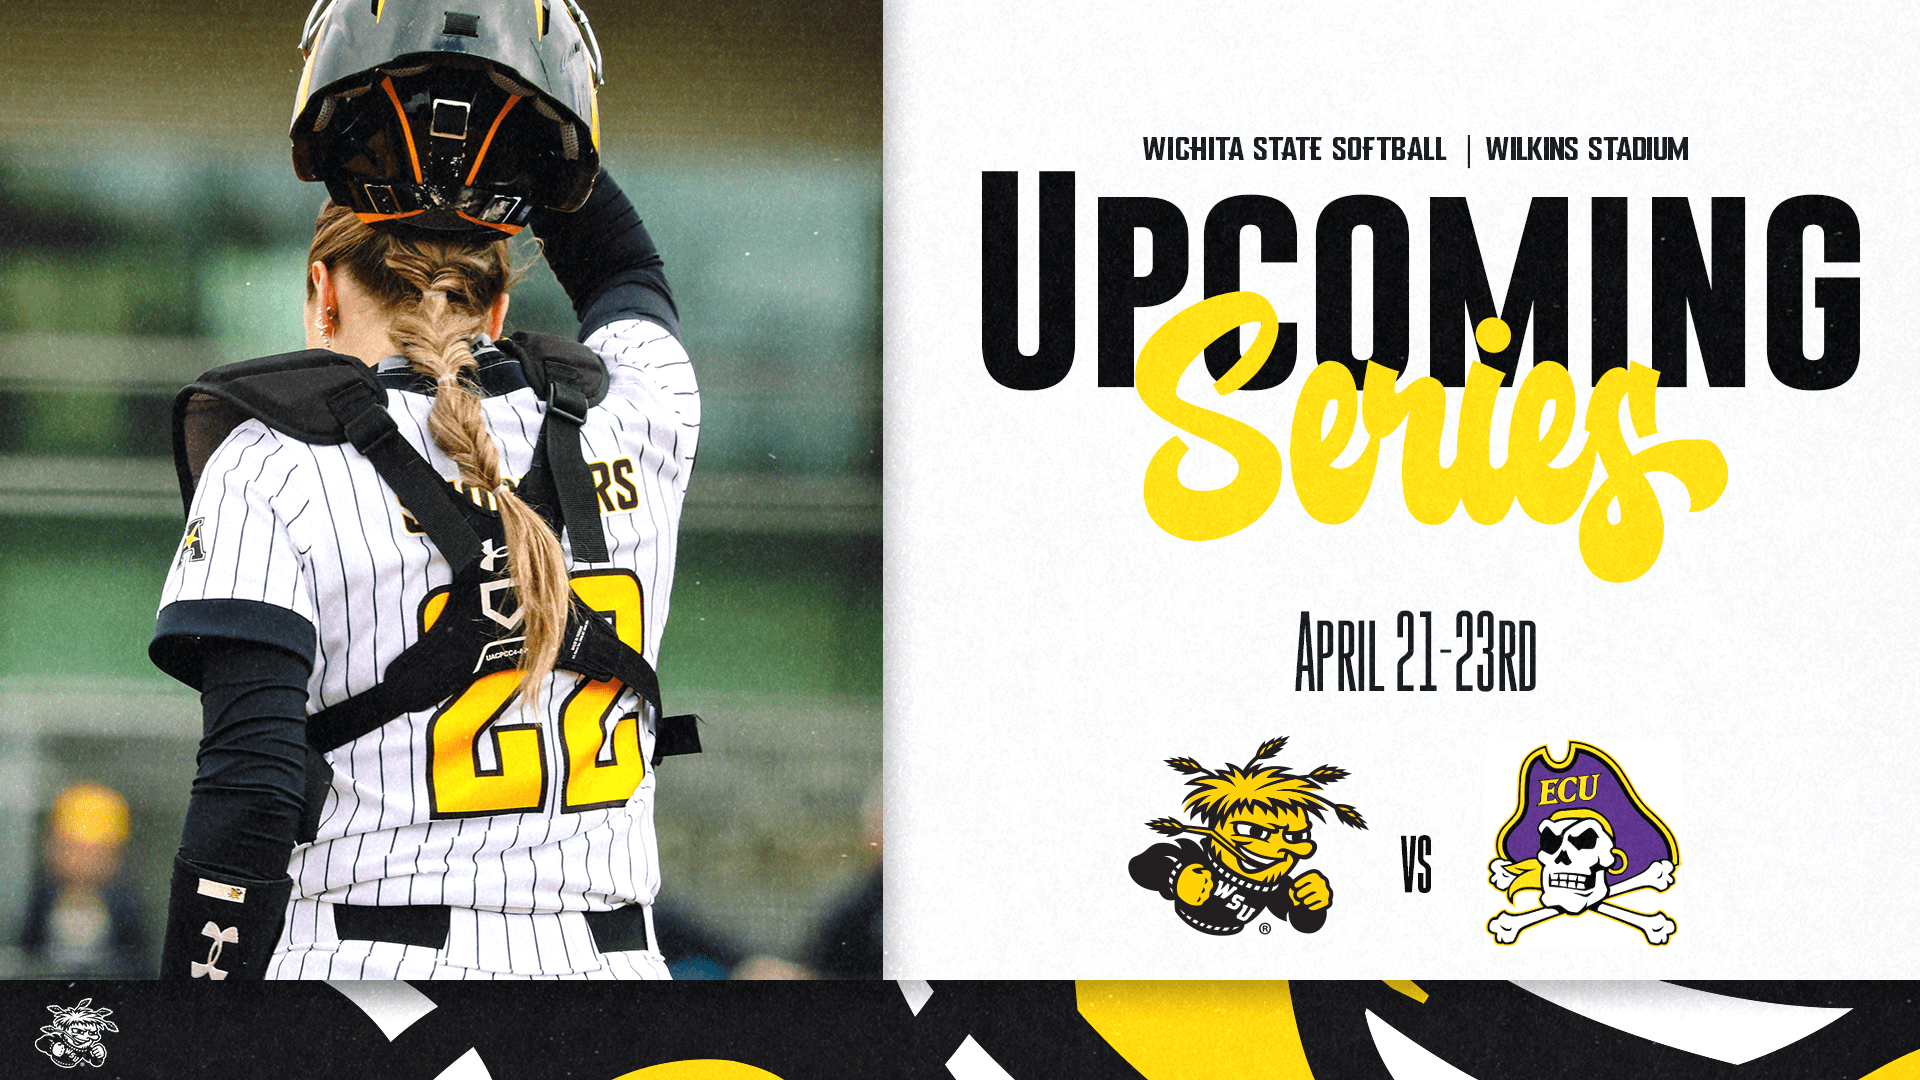 Graphic with a photo of a Shocker softball player and the text, "Wichita State Softball | Wilkins Stadium Upcoming Series. April 21-23rd" and the WuShock and ECU logos.